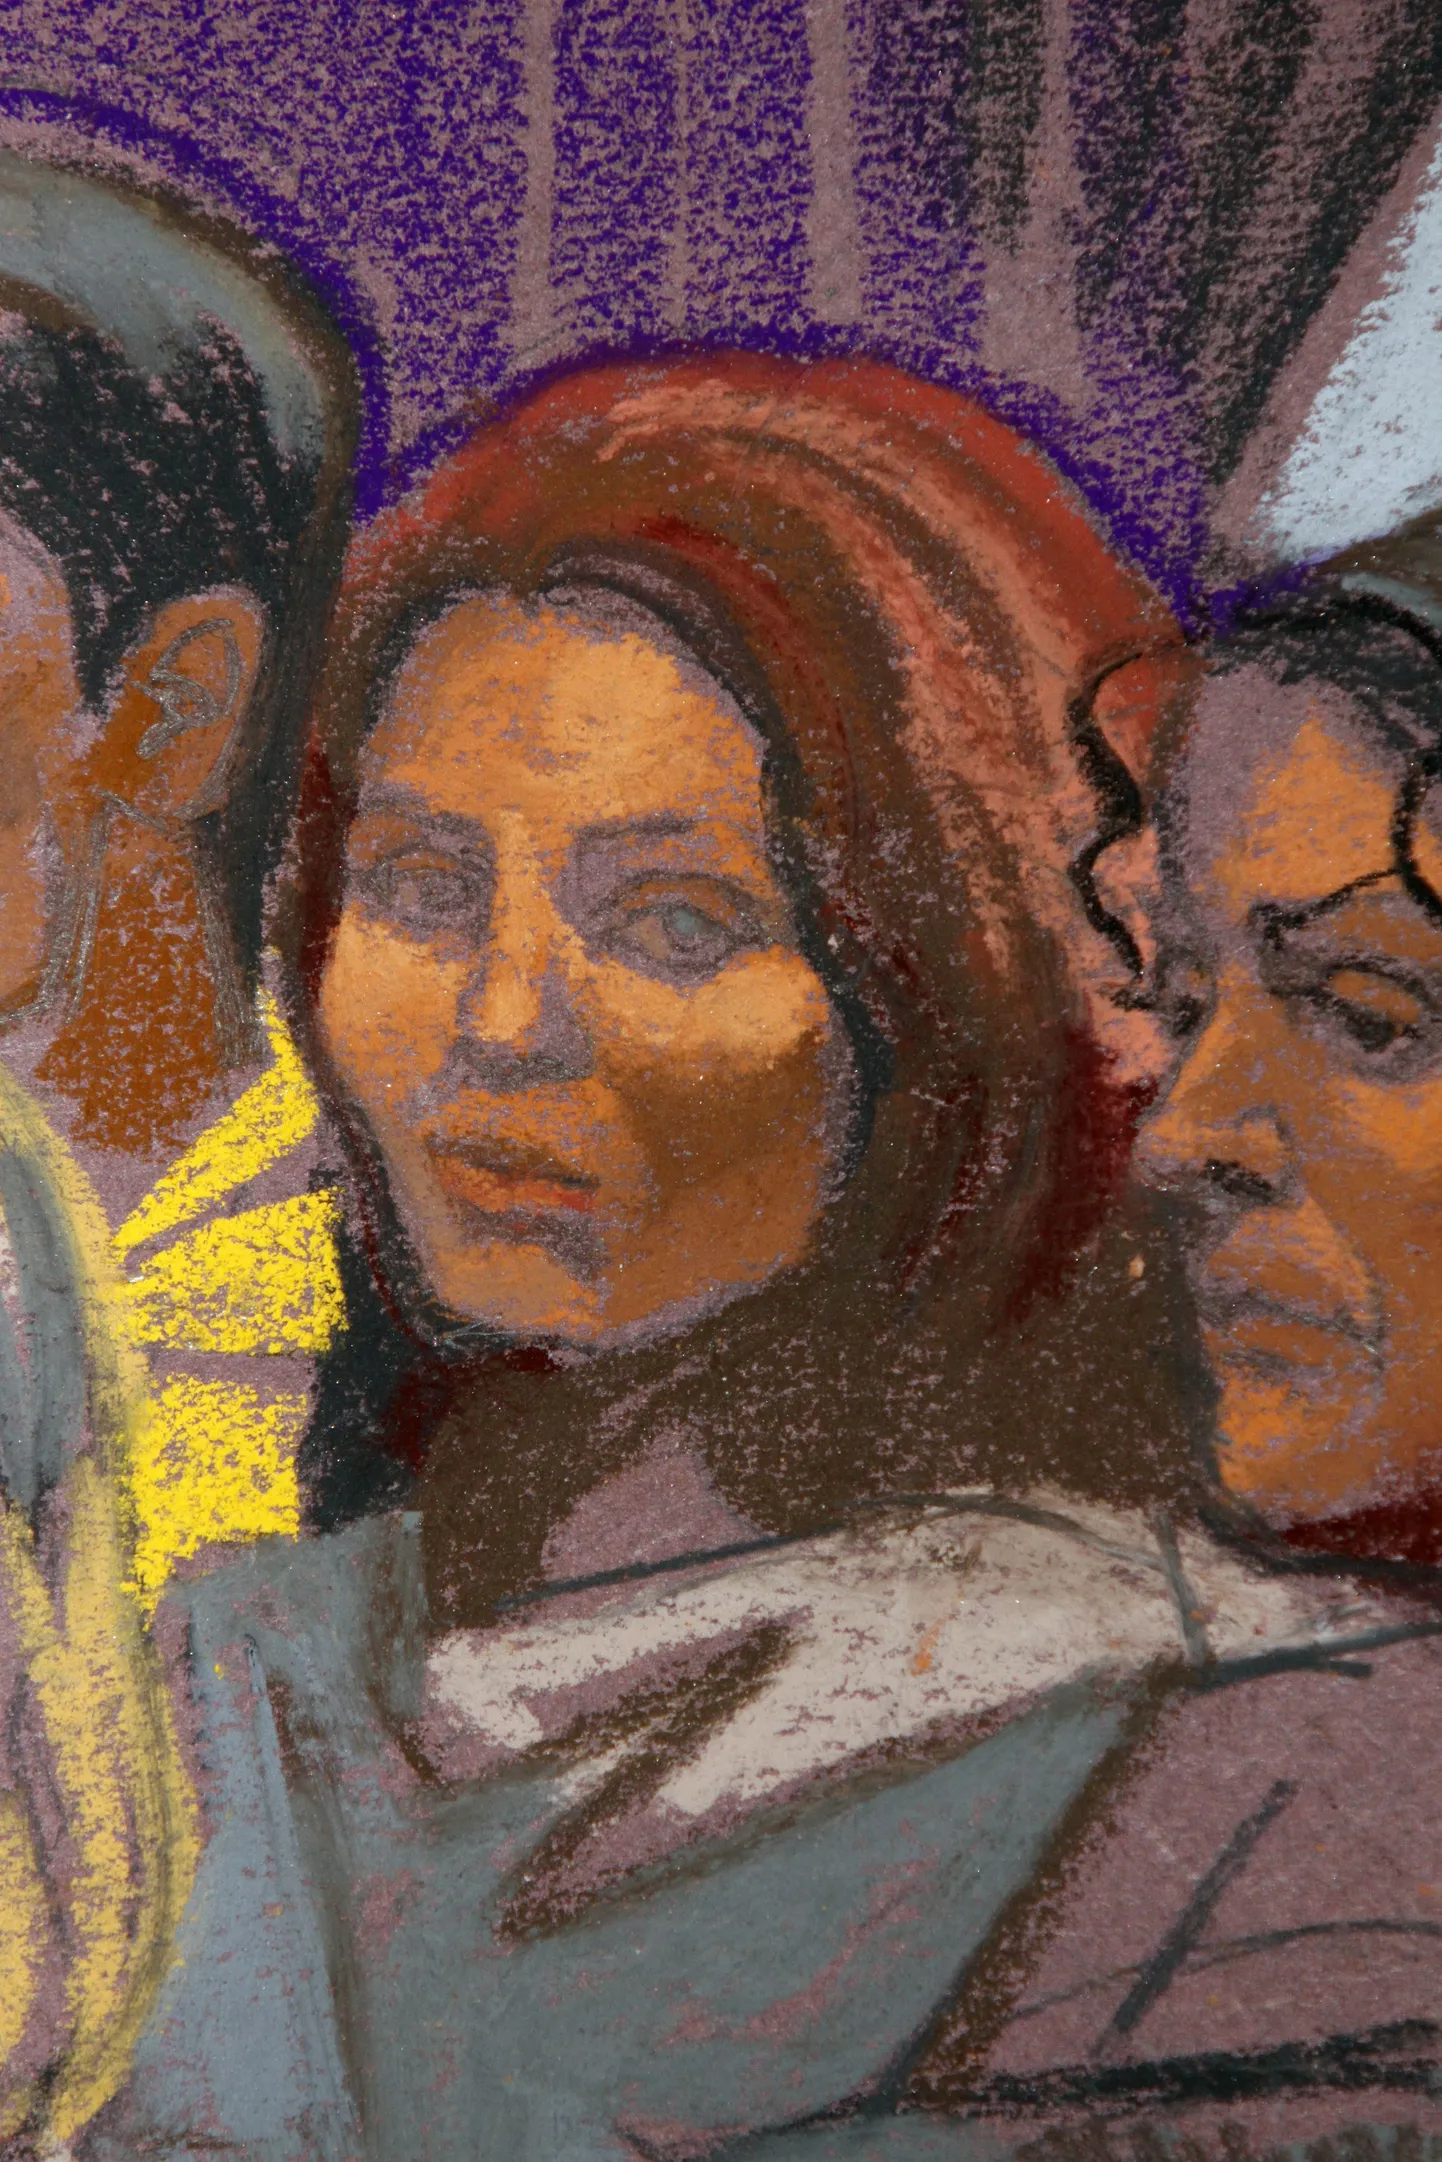 Anna Chapman, a member of a Russian spy ring is seen in this courtroom sketch during an appearance in Manhattan Federal Court in New York, July 8, 2010. Ten people pleaded guilty on Thursday to being unregistered foreign agents for Russia while living undercover in the United States and agreed to be deported to Russia as part of a swap of imprisoned spies between the U.S. and Russian governments.  REUTERS/Christine Cornell  (UNITED STATES - Tags: CRIME LAW POLITICS)